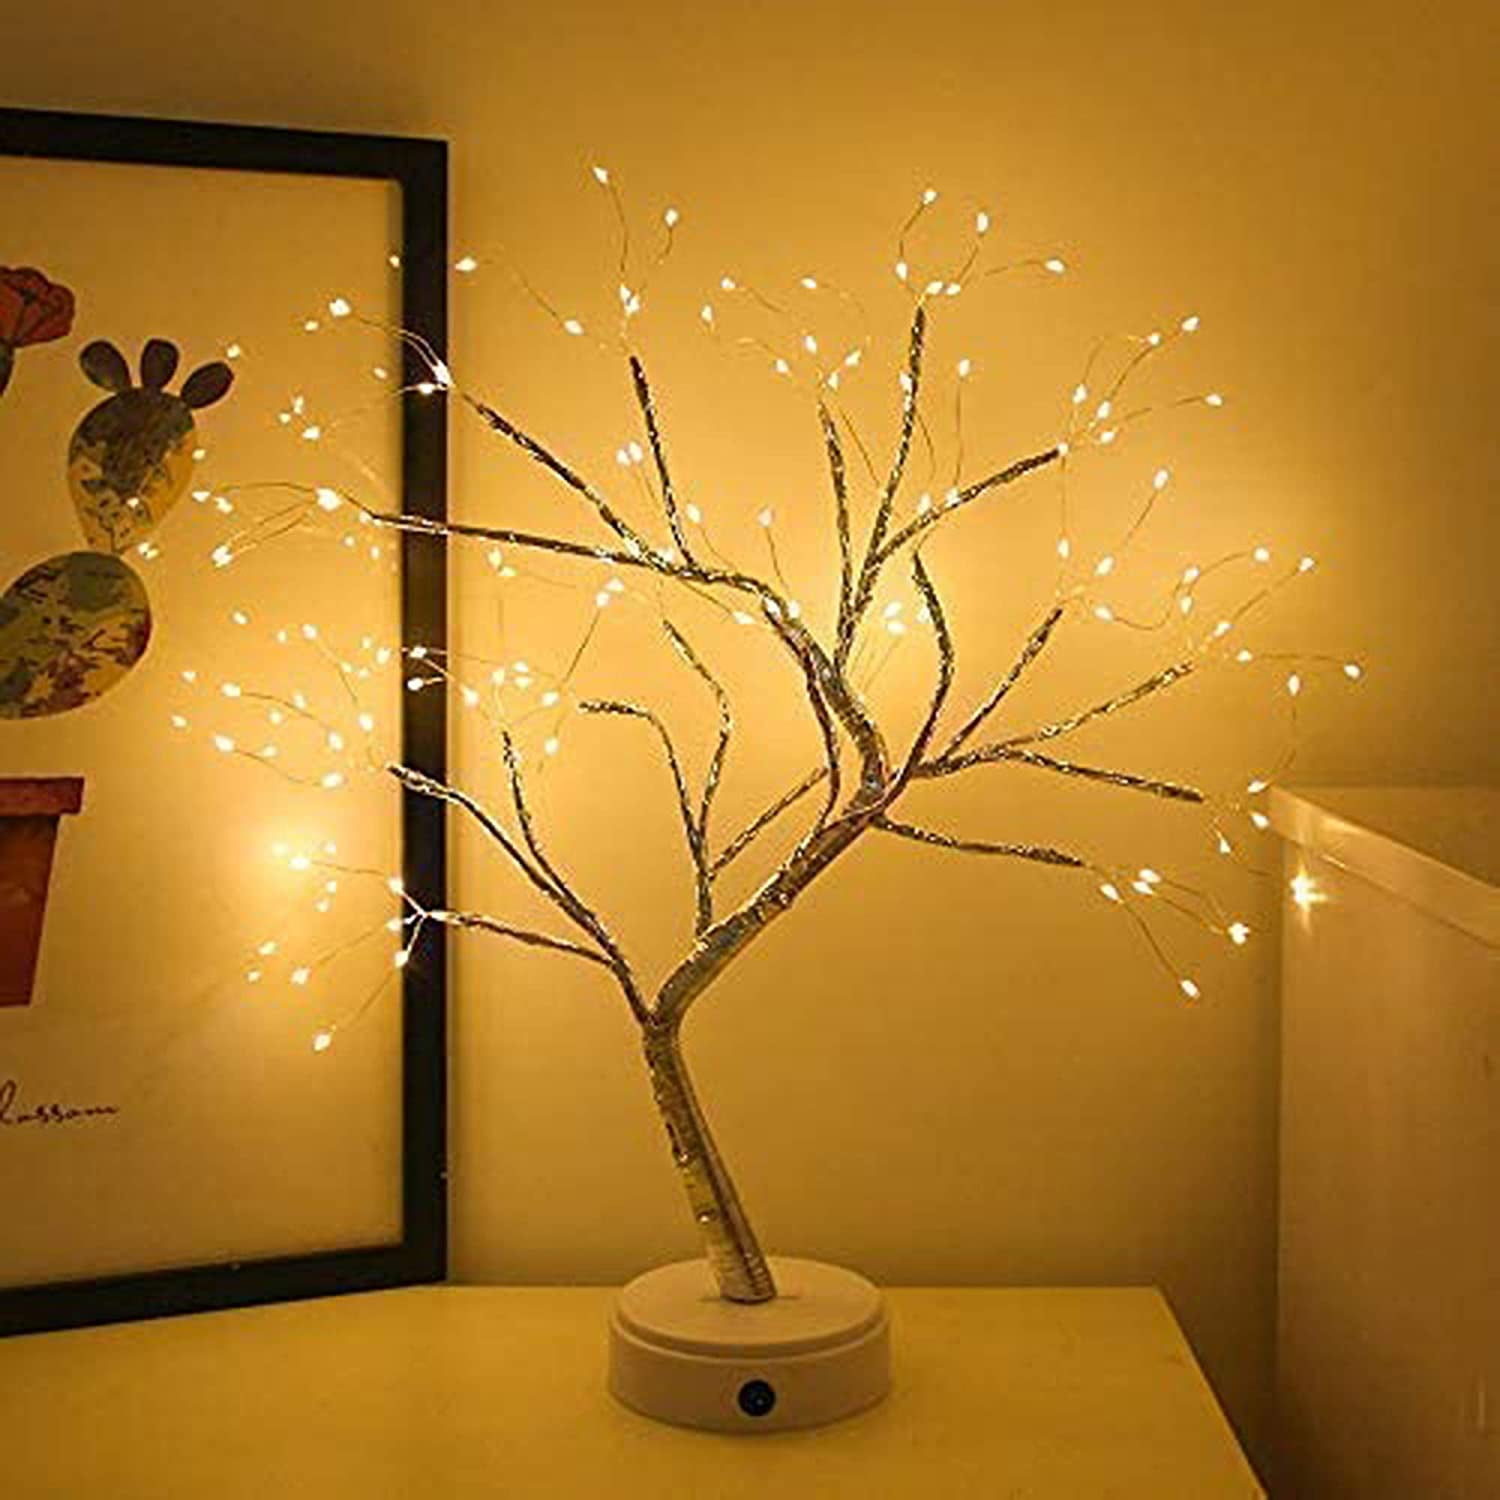 Firefly Bonsai Tree Light 20 Artificial Fairy Light Spirit Tree Lamp With 108 Led Lights Usb Battery Touch Switch Deco Of Children S Room Bedroom Living Room Party Wedding And Christmas